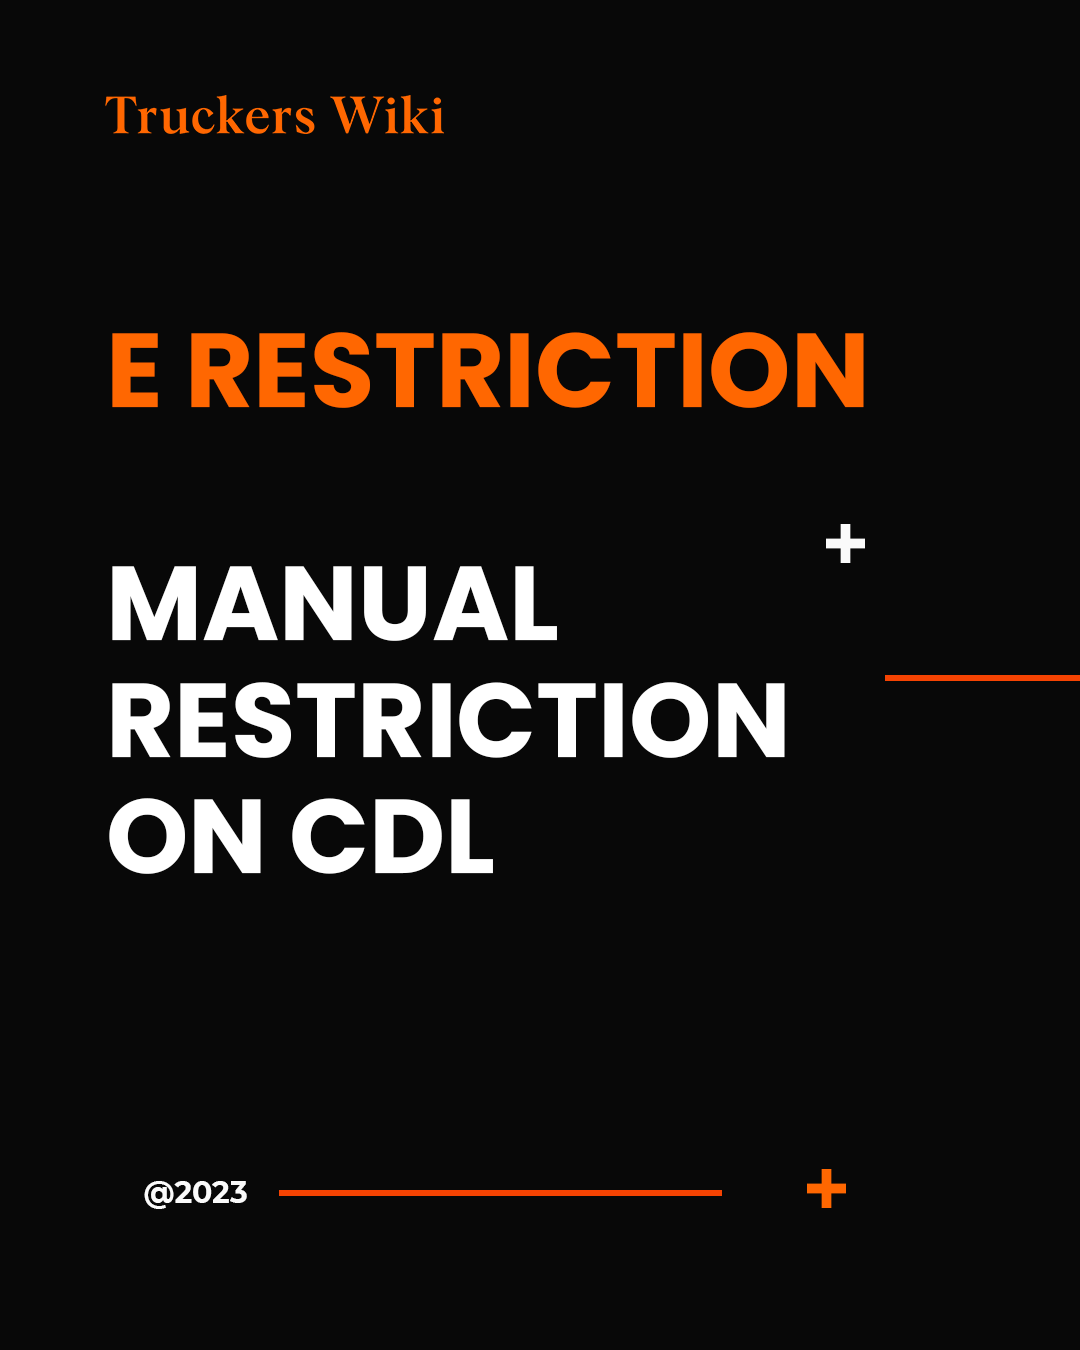 E Restriction Manual Definition Trucking - Truckers Wiki Carousel 1